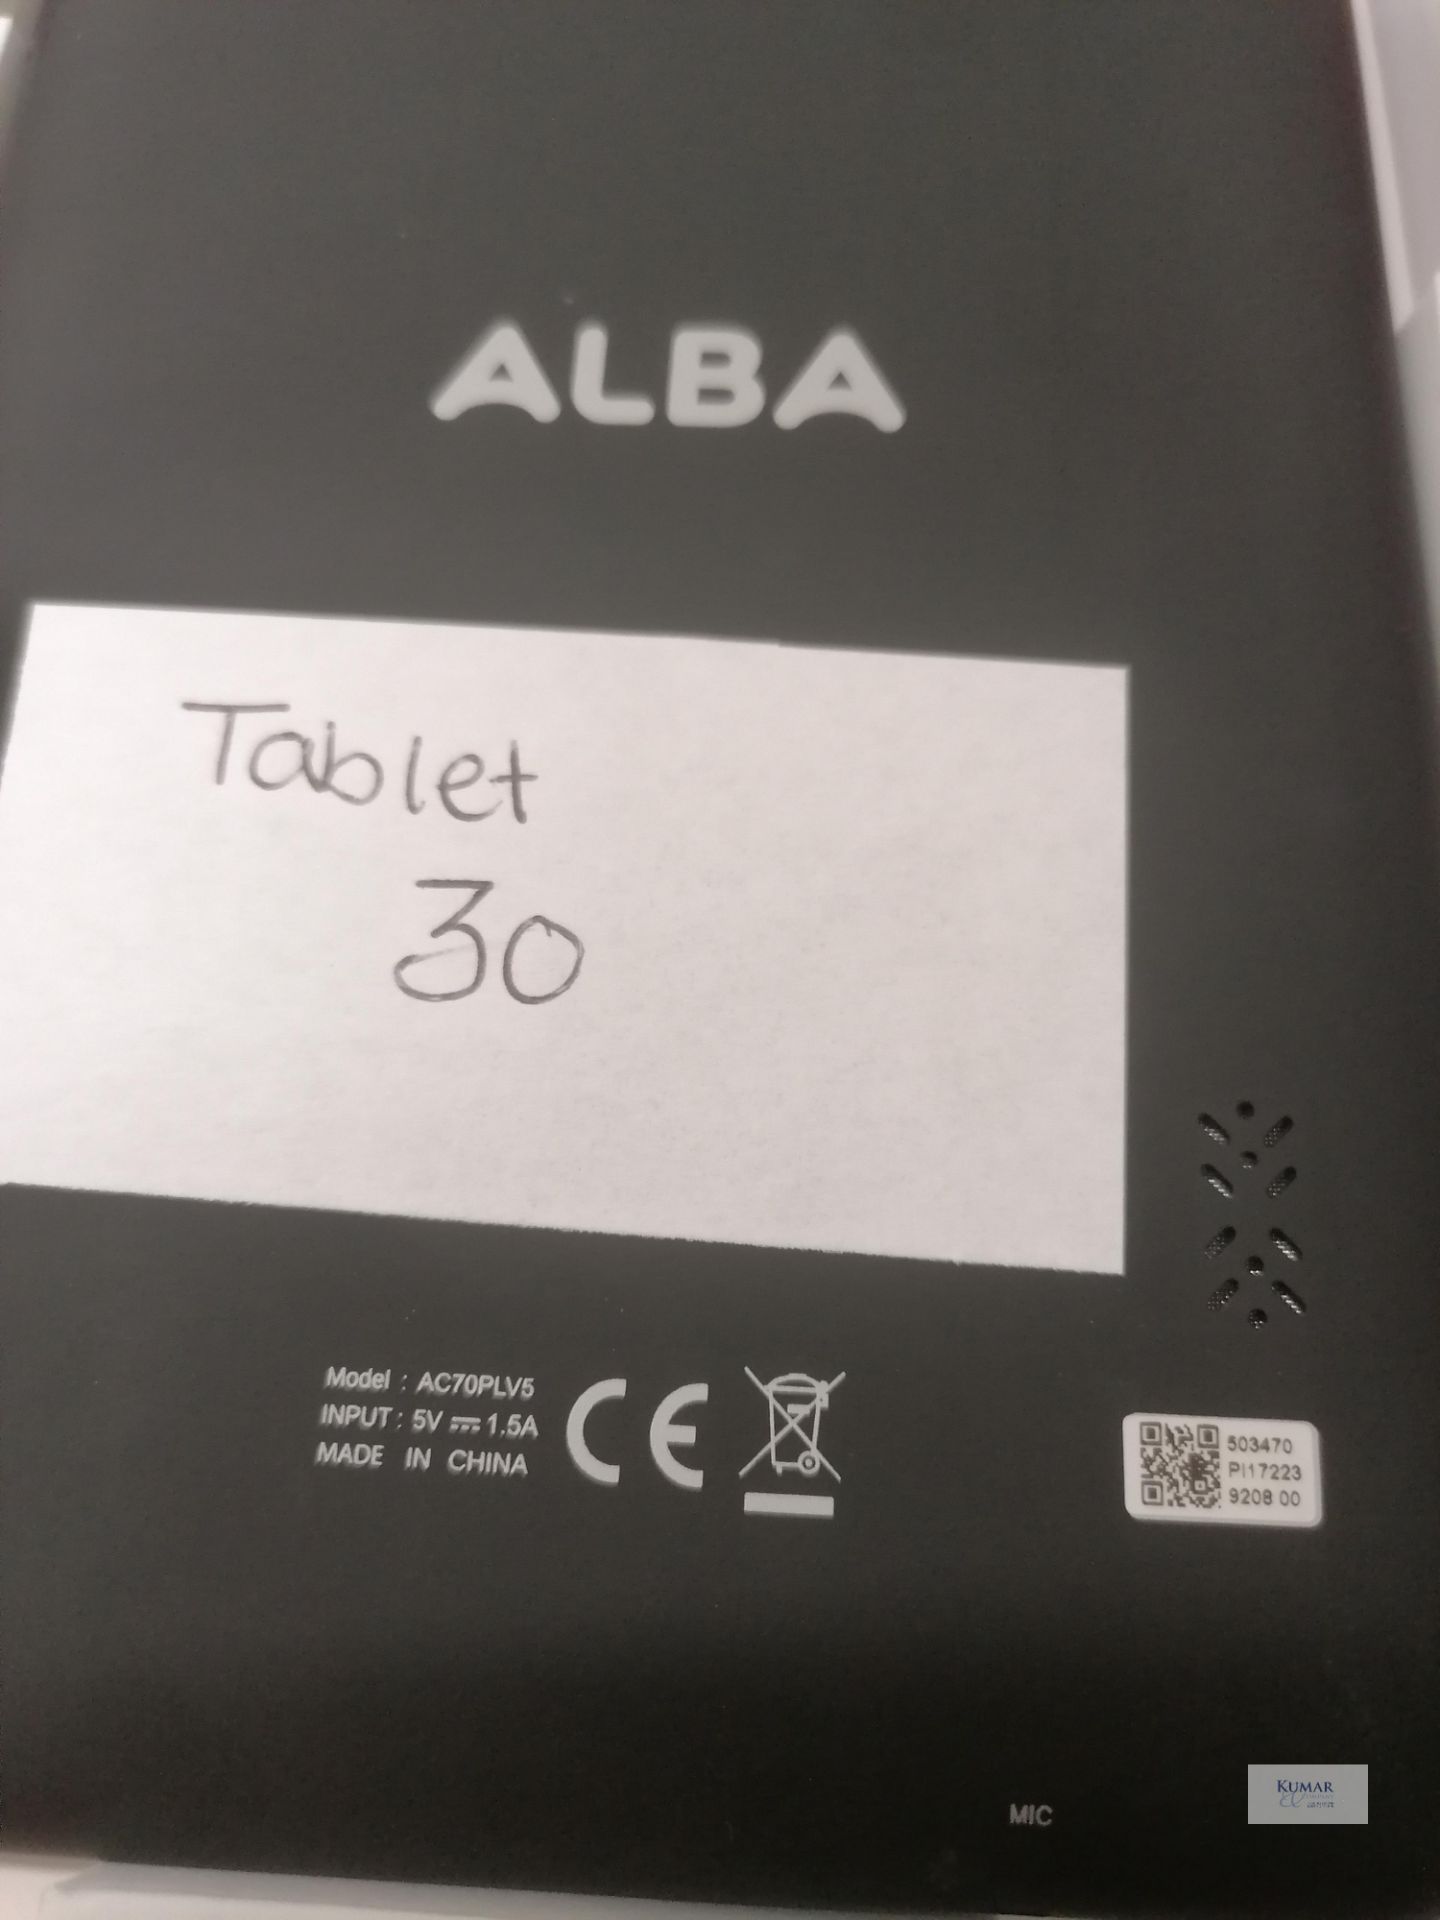 Alba Model AC07PLVS 7" Tablet with protective case,cable and charger Boxed - Image 6 of 6